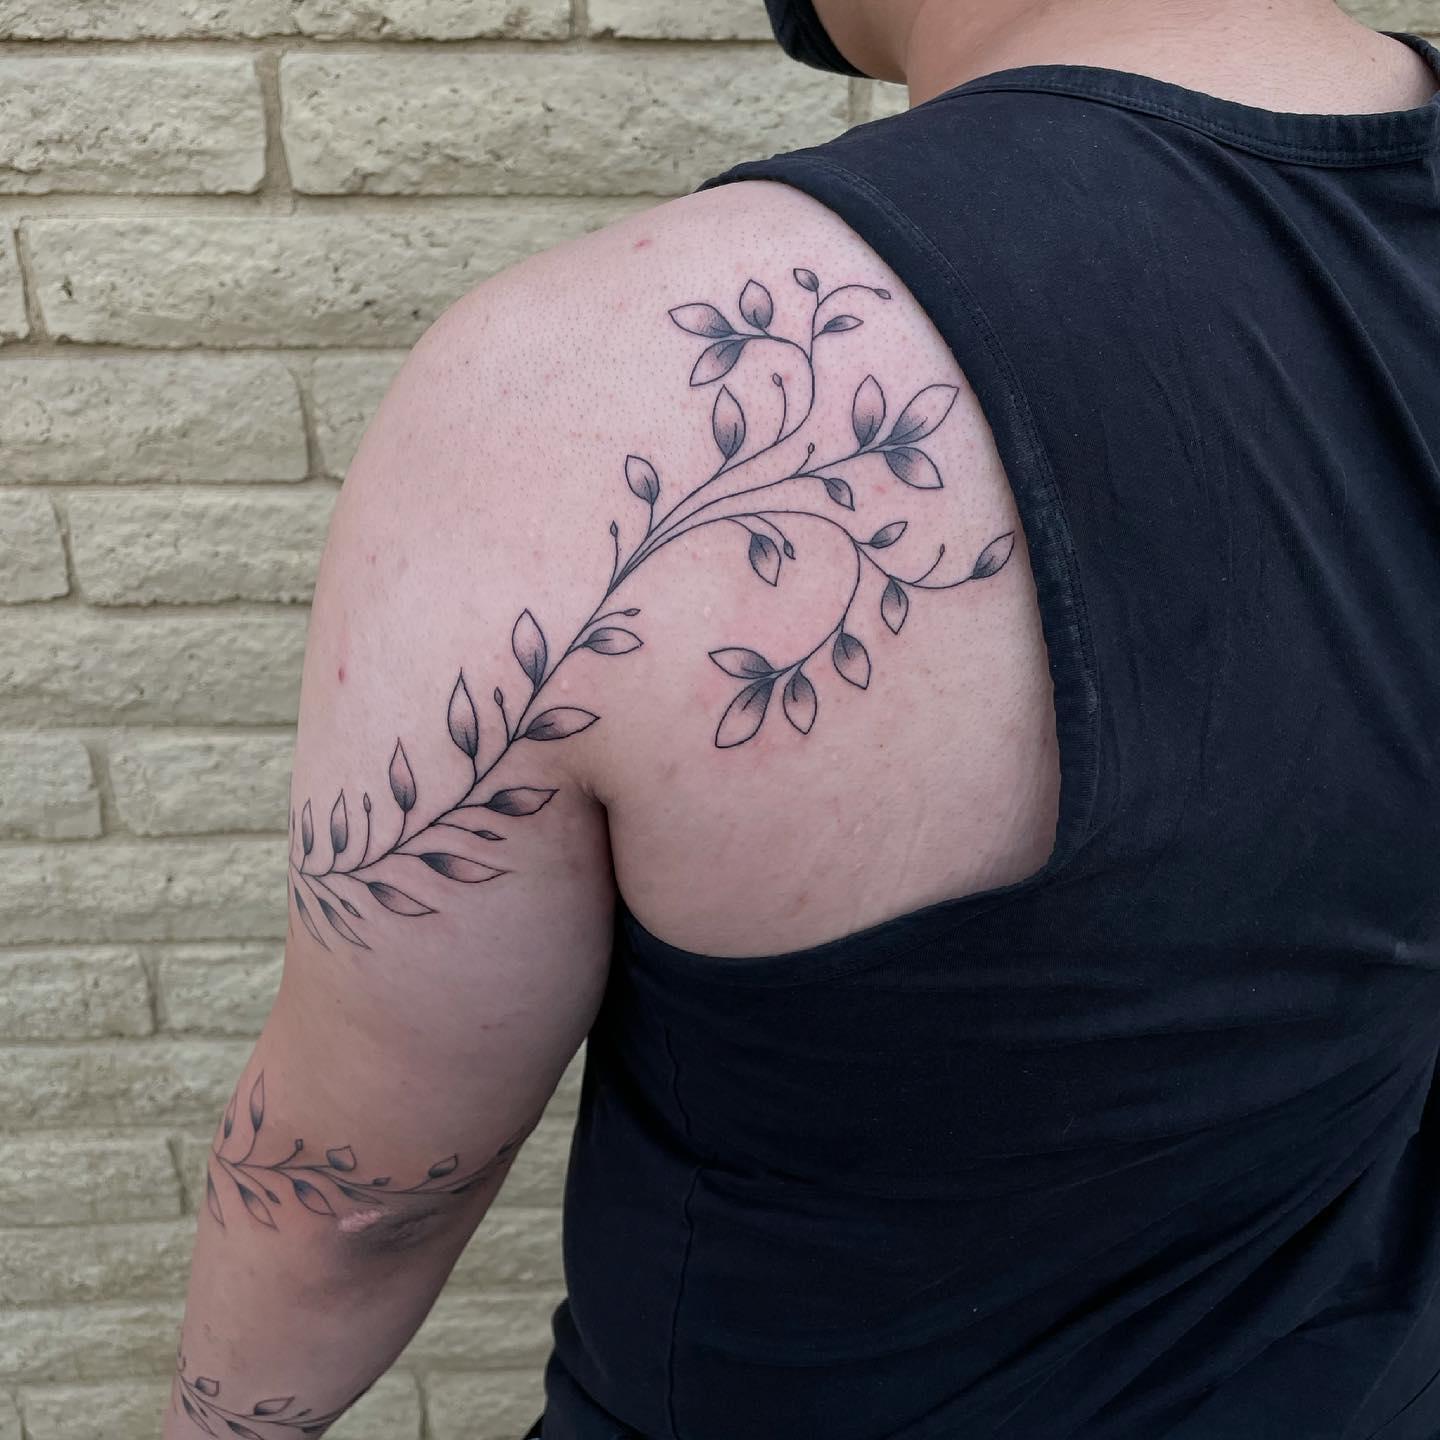 Tattoo Vine with symbolic meaning